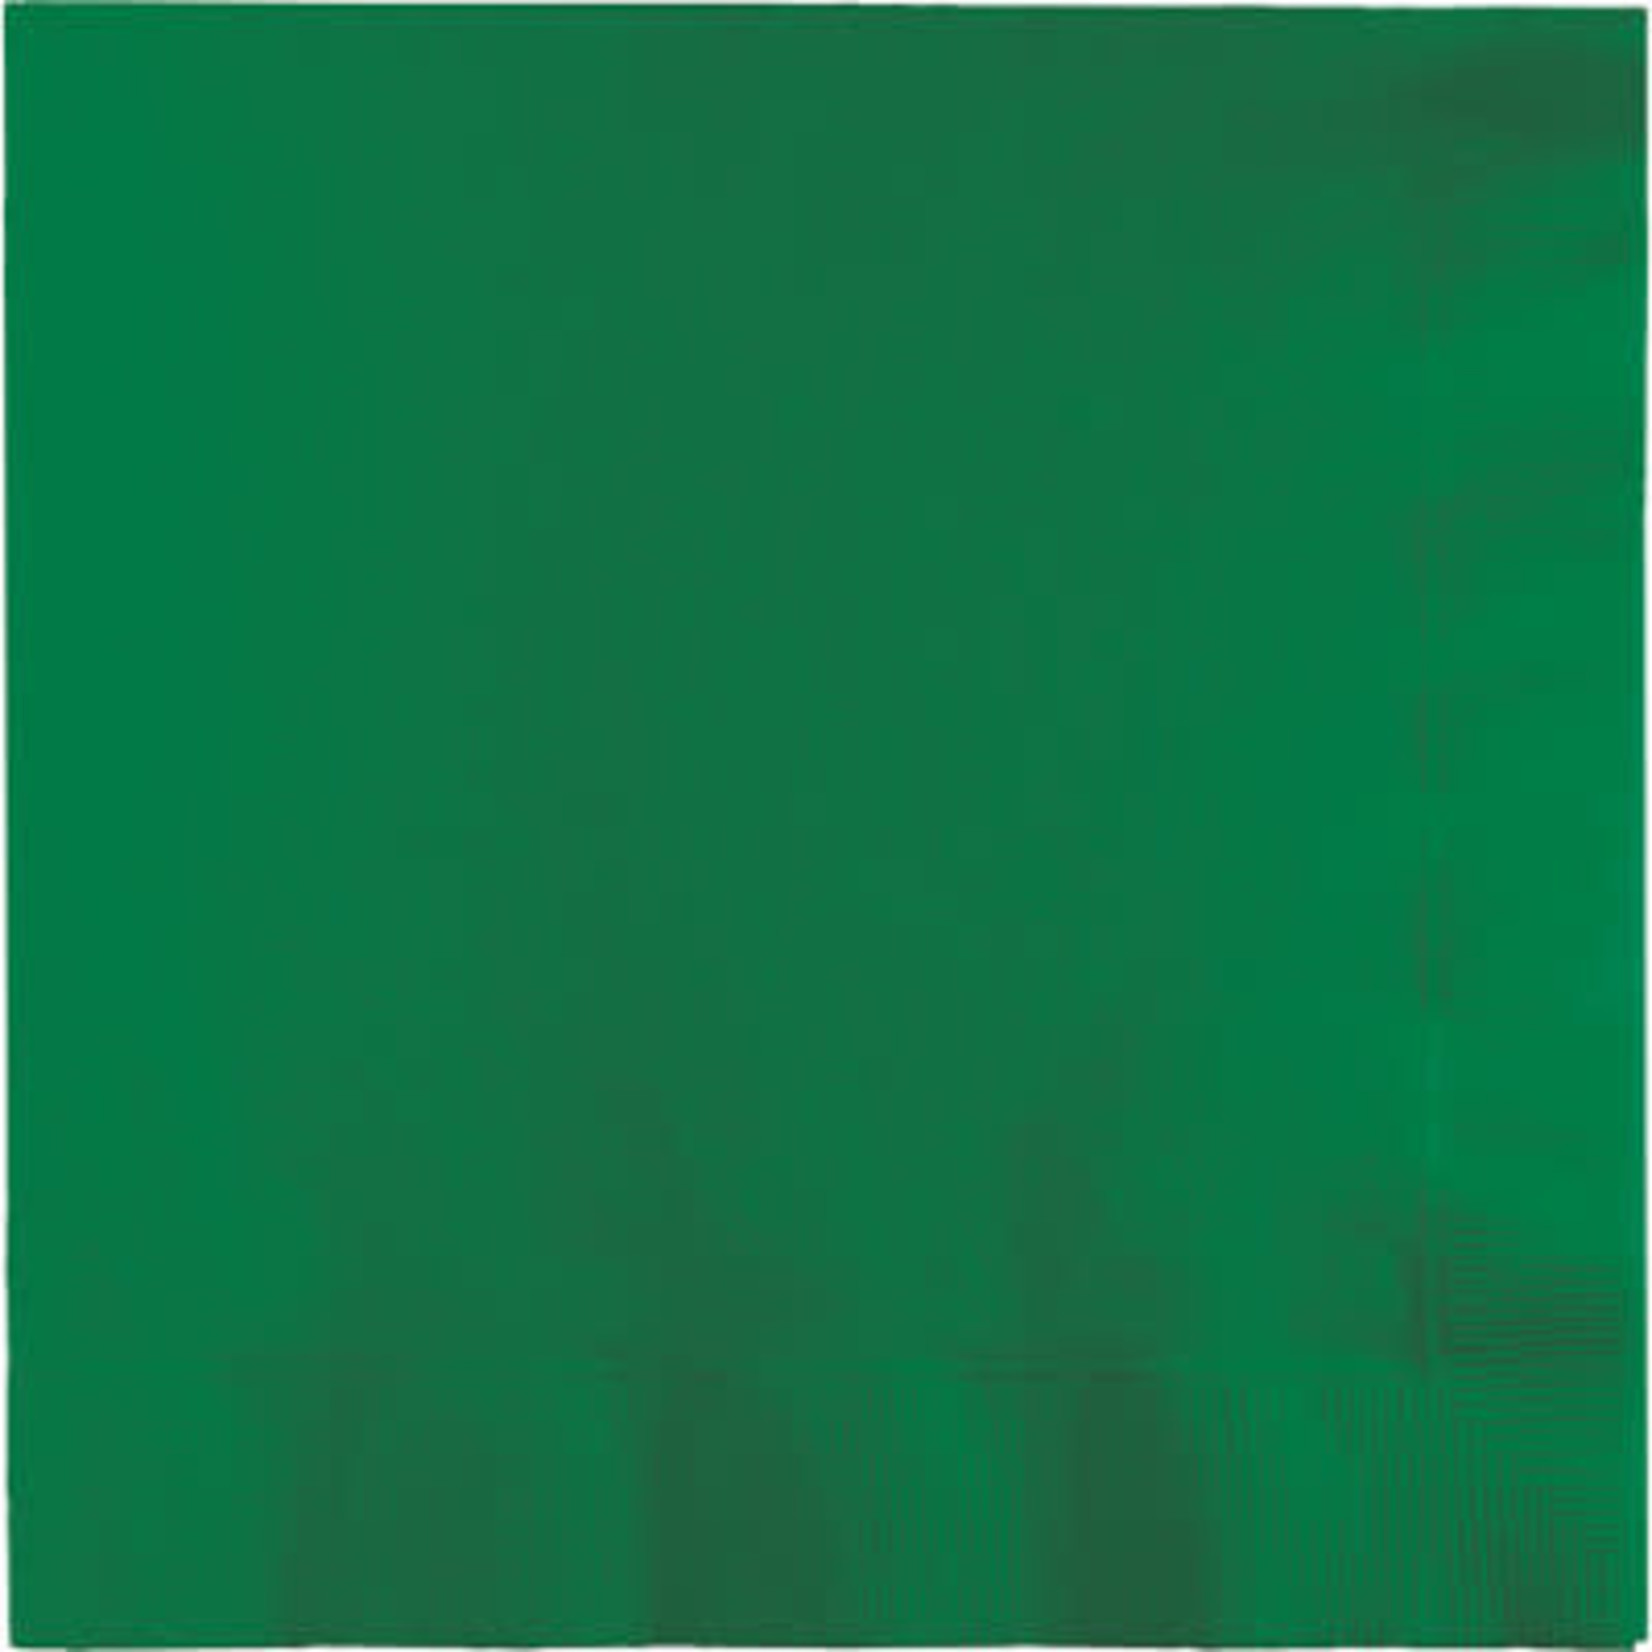 Touch of Color Emerald Green 2-Ply Lunch Napkins - 50ct.